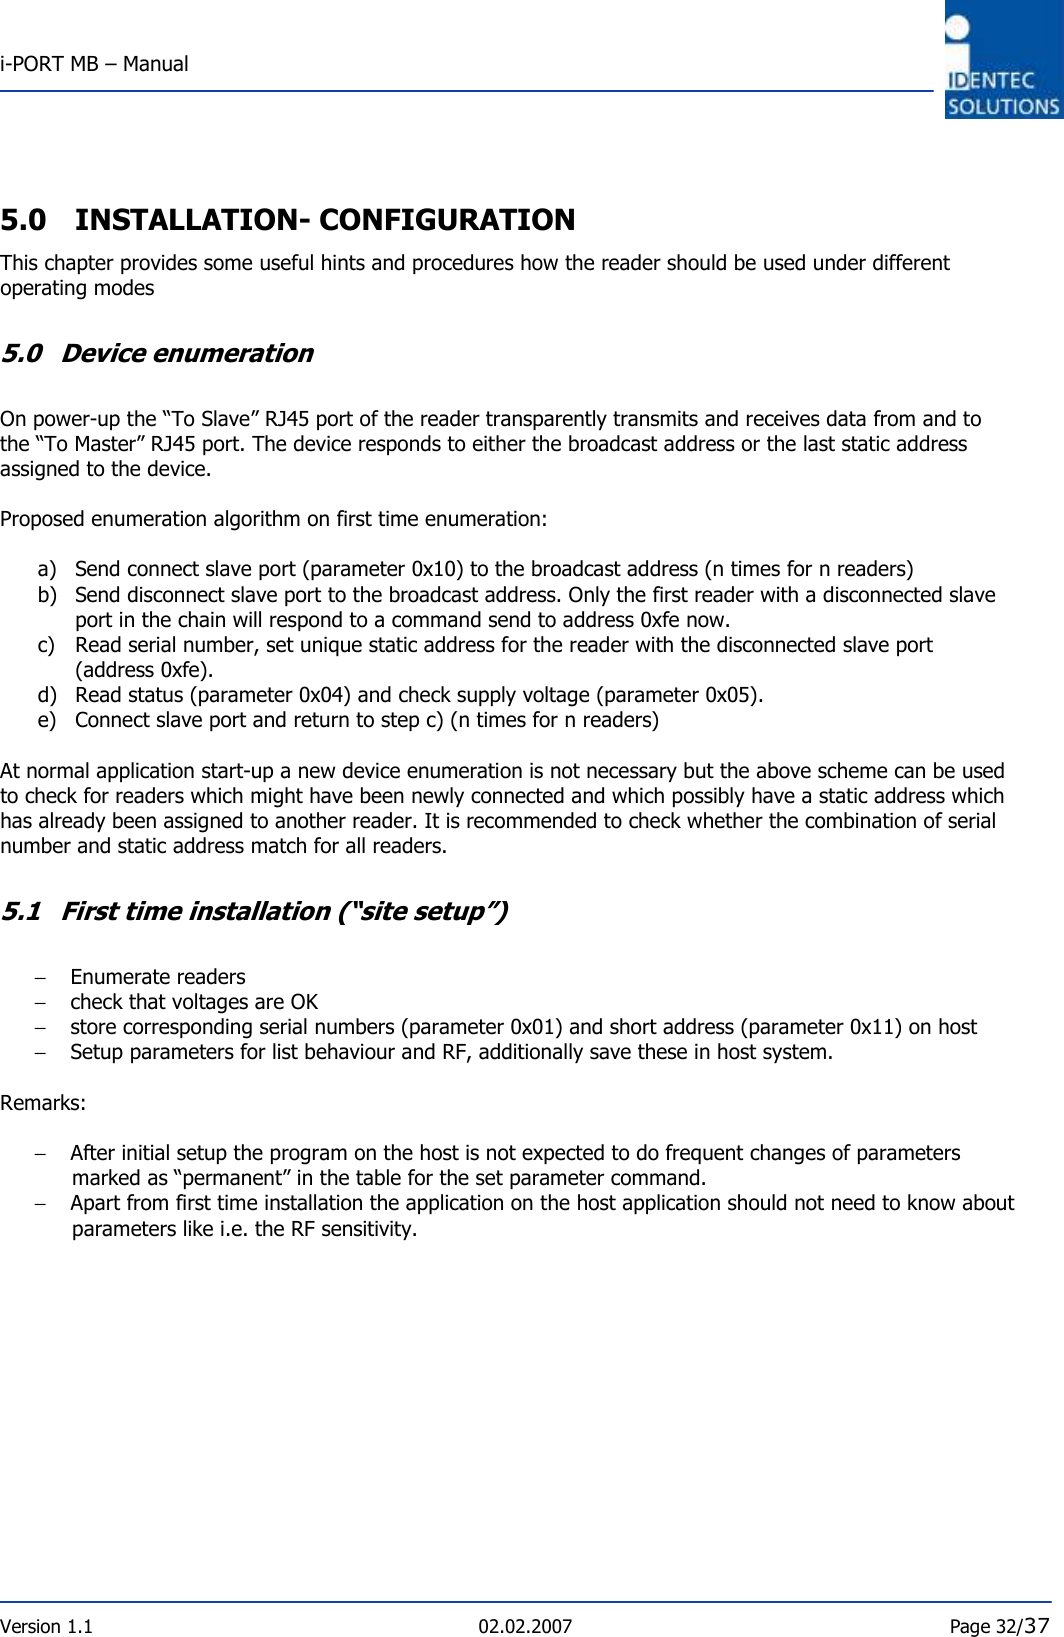  i-PORT MB – Manual       Version 1.1  02.02.2007  Page 32/37  5.0 INSTALLATION- CONFIGURATION This chapter provides some useful hints and procedures how the reader should be used under different operating modes   5.0 Device enumeration  On power-up the “To Slave” RJ45 port of the reader transparently transmits and receives data from and to the “To Master” RJ45 port. The device responds to either the broadcast address or the last static address assigned to the device.  Proposed enumeration algorithm on first time enumeration:  a) Send connect slave port (parameter 0x10) to the broadcast address (n times for n readers) b) Send disconnect slave port to the broadcast address. Only the first reader with a disconnected slave port in the chain will respond to a command send to address 0xfe now.  c) Read serial number, set unique static address for the reader with the disconnected slave port (address 0xfe). d) Read status (parameter 0x04) and check supply voltage (parameter 0x05).  e) Connect slave port and return to step c) (n times for n readers)  At normal application start-up a new device enumeration is not necessary but the above scheme can be used to check for readers which might have been newly connected and which possibly have a static address which has already been assigned to another reader. It is recommended to check whether the combination of serial number and static address match for all readers.  5.1 First time installation (“site setup”)  − Enumerate readers  − check that voltages are OK − store corresponding serial numbers (parameter 0x01) and short address (parameter 0x11) on host − Setup parameters for list behaviour and RF, additionally save these in host system.   Remarks:  − After initial setup the program on the host is not expected to do frequent changes of parameters marked as “permanent” in the table for the set parameter command.  − Apart from first time installation the application on the host application should not need to know about parameters like i.e. the RF sensitivity. 